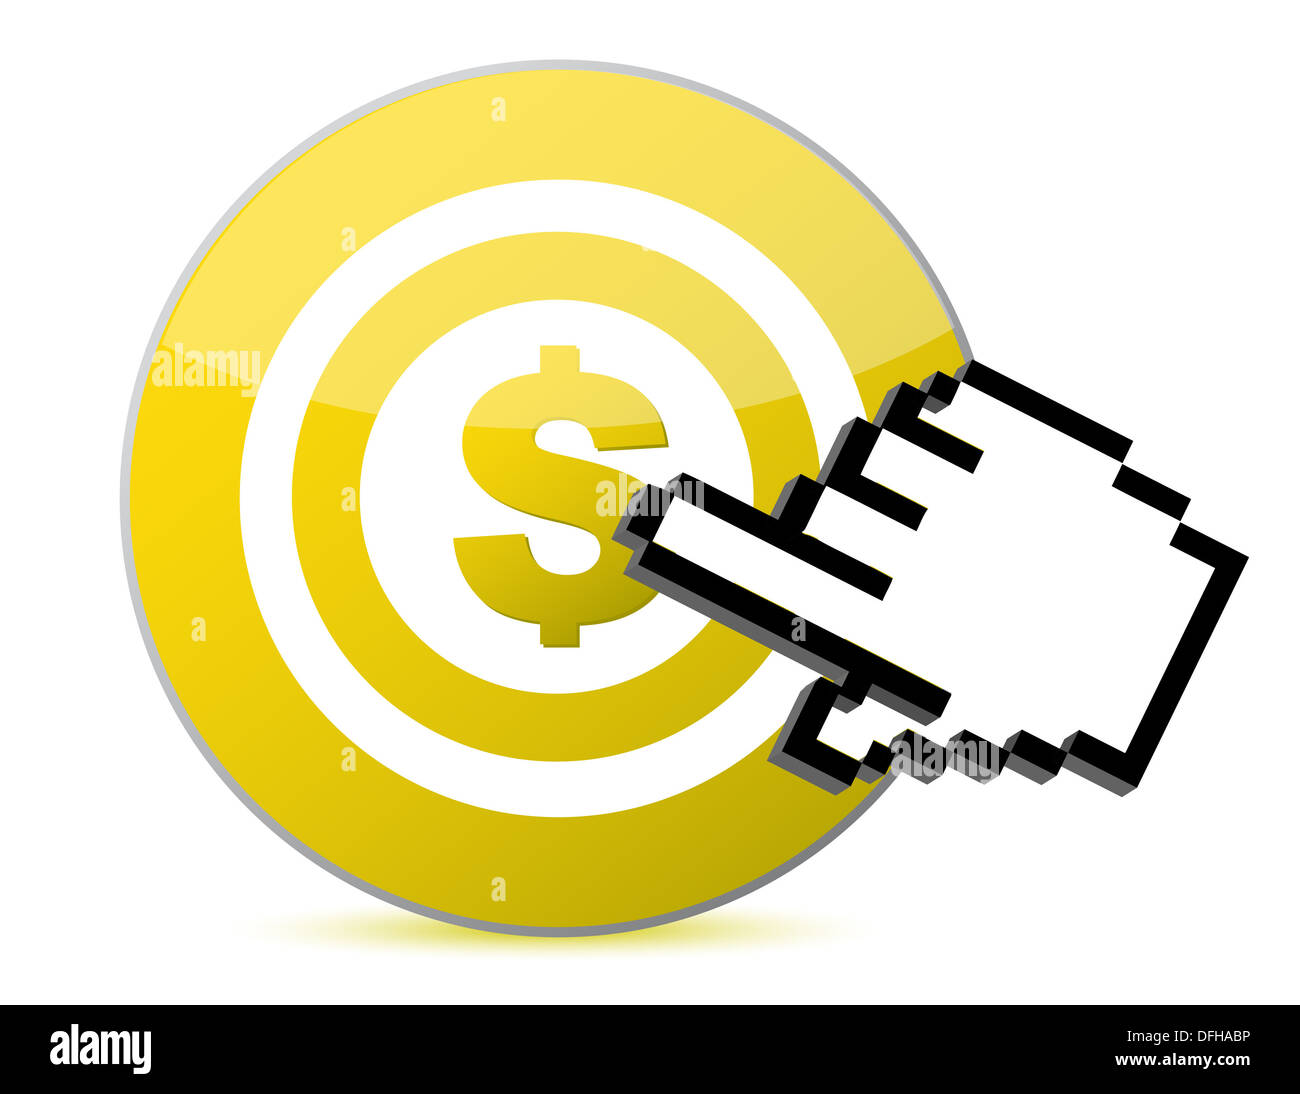 Target with dollar currency sign illustration with a hand cursor illustration Stock Photo